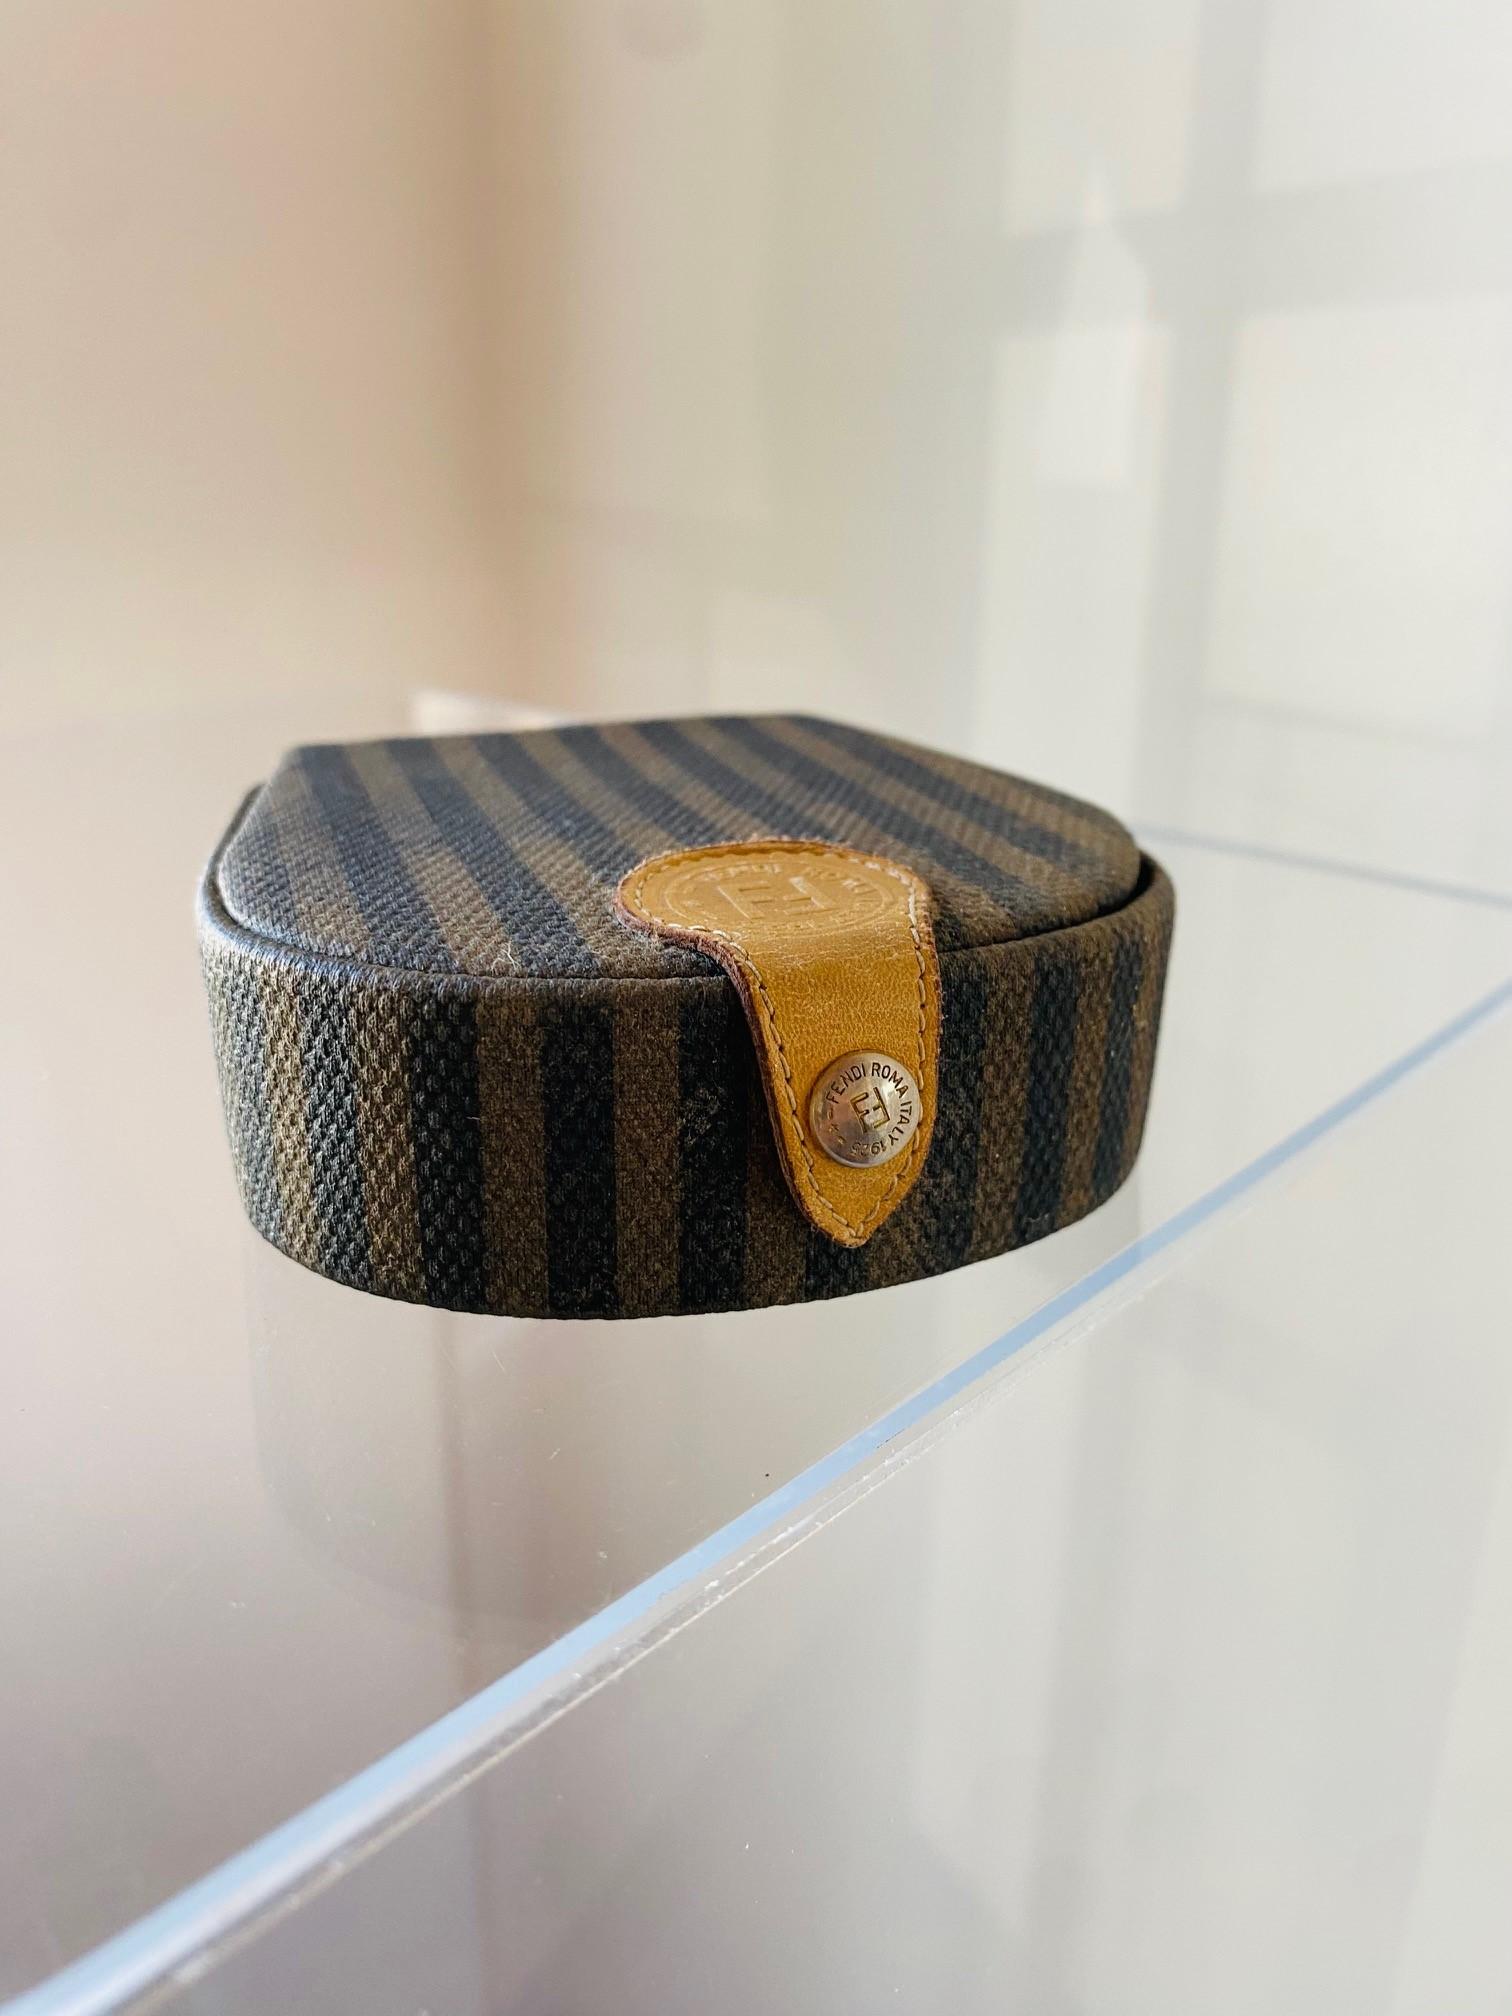 Unique and interesting trinket box by Fendi.  This vintage piece from the early 1990s is made in leather and covered in the classic Fendi stripe fabric design.  This piece opens with a snap hardware button that holds the Fendi logo to reveal a